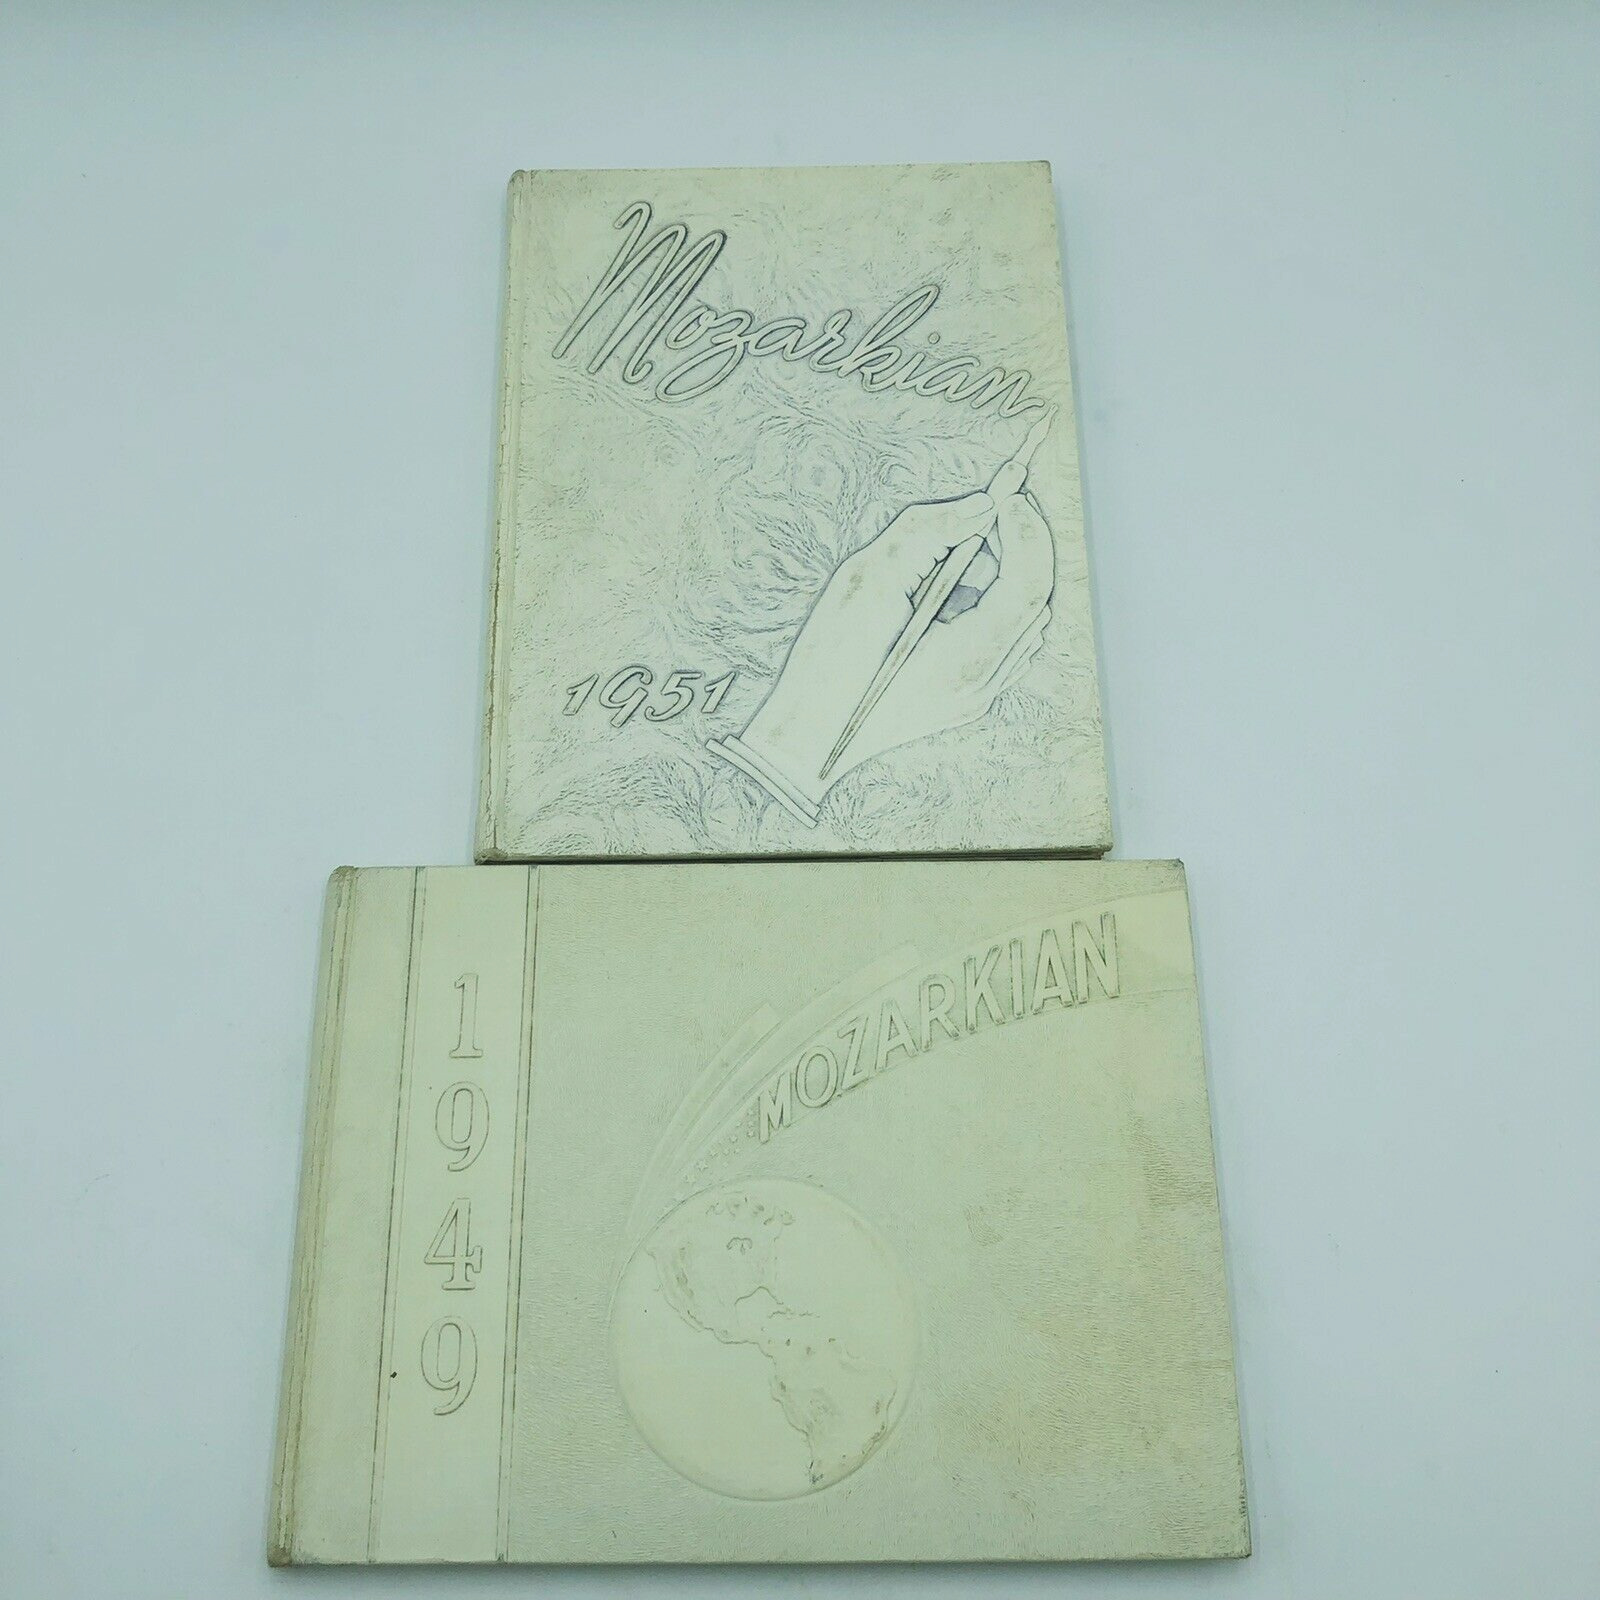 Southwest Baptist College Yearbook Mozarkian 1949 and 1951